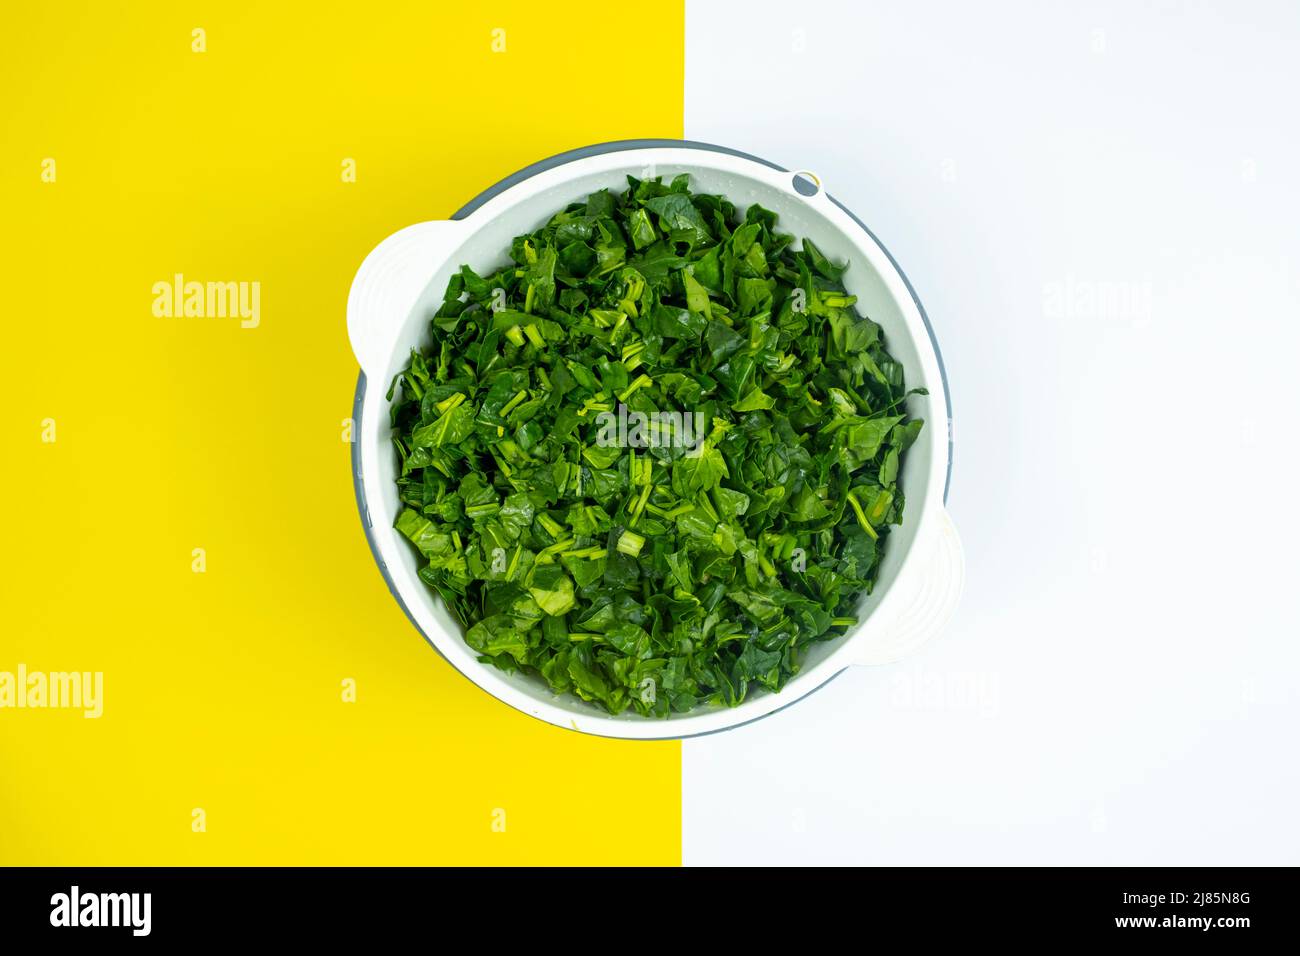 Lots of chopped spinach in white case, cooking and vegetable idea, healthy lifestyle, vegan life, yellow and white background, top view of spinach Stock Photo